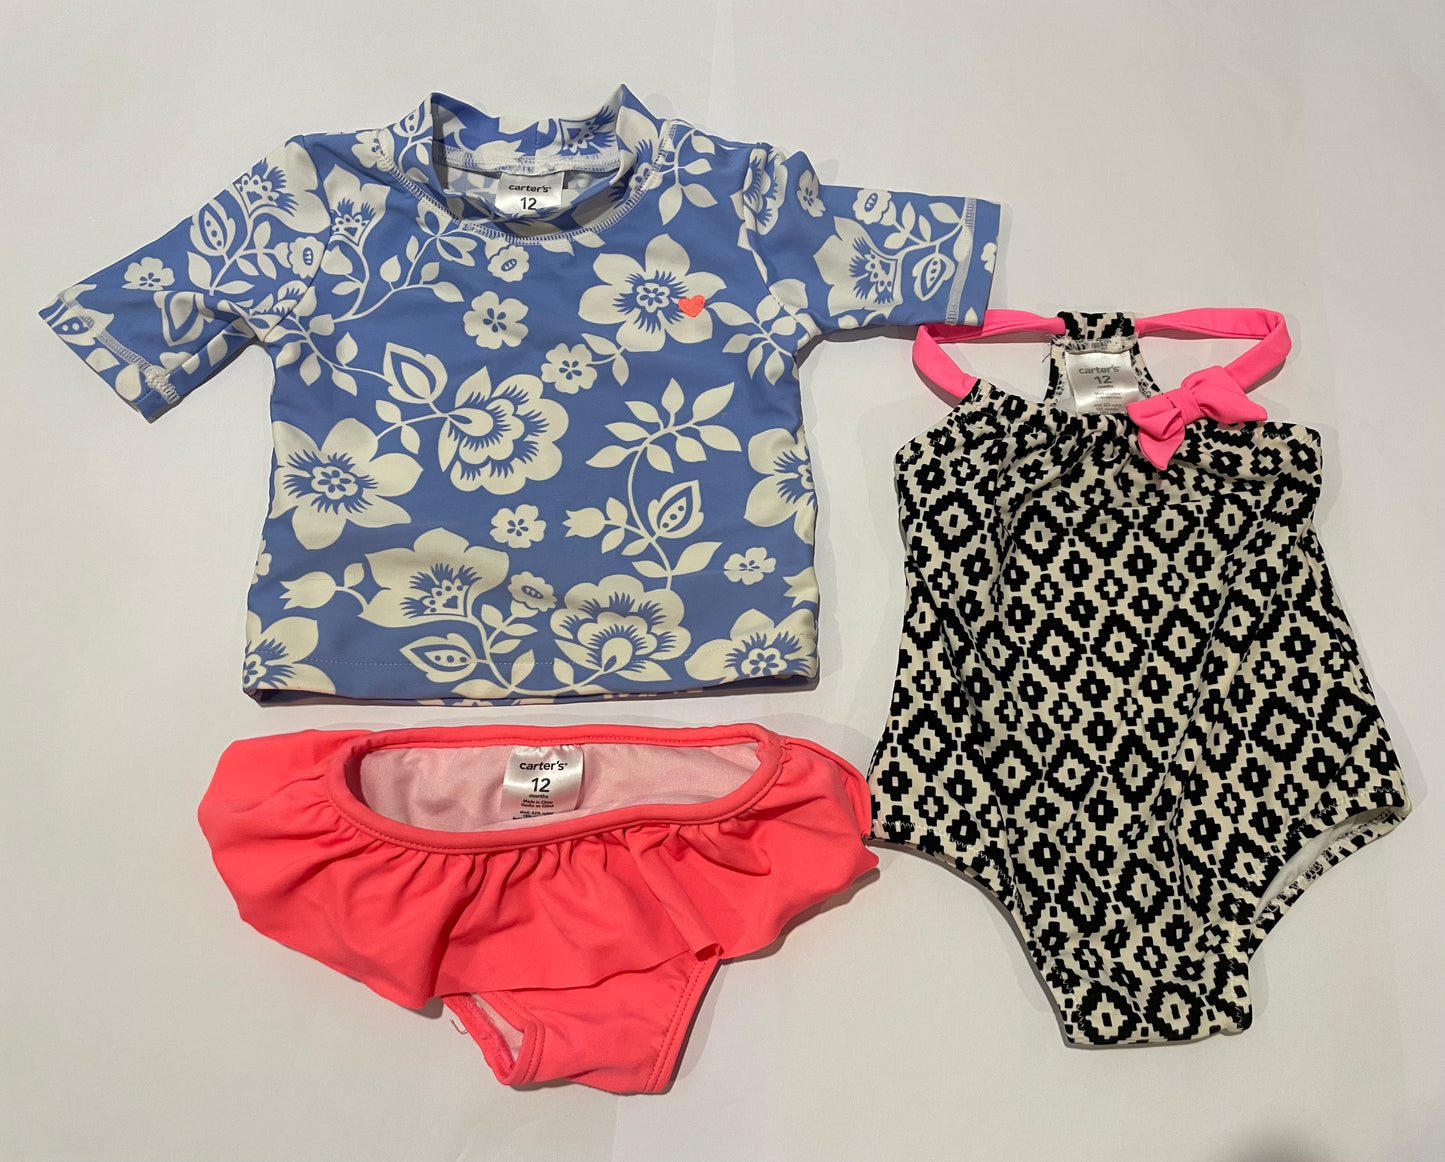 Carters Girls 12 months Bundle of 2 Swimsuits  GUC